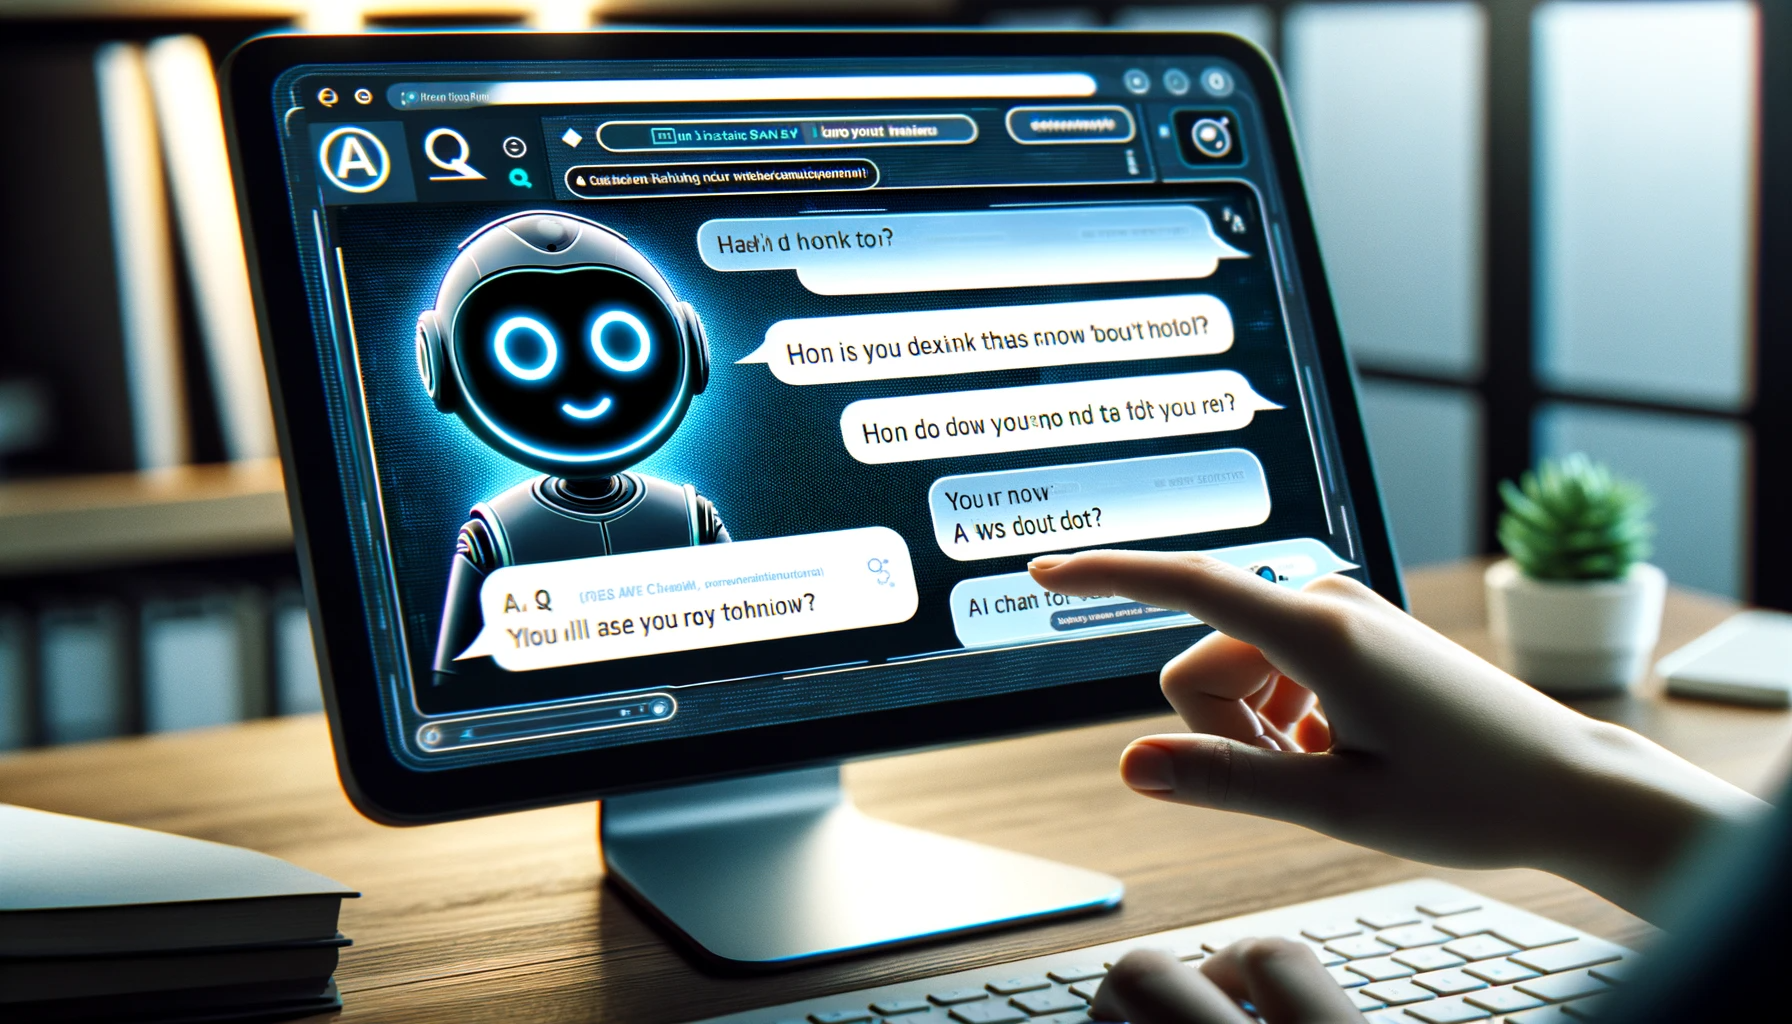 DALL·E 2023-11-30 00.09.42 - An image of an AI-powered chatbot interface on a computer screen, showing a conversation between a user and the chatbot 'Q'. The chatbot is providing .png